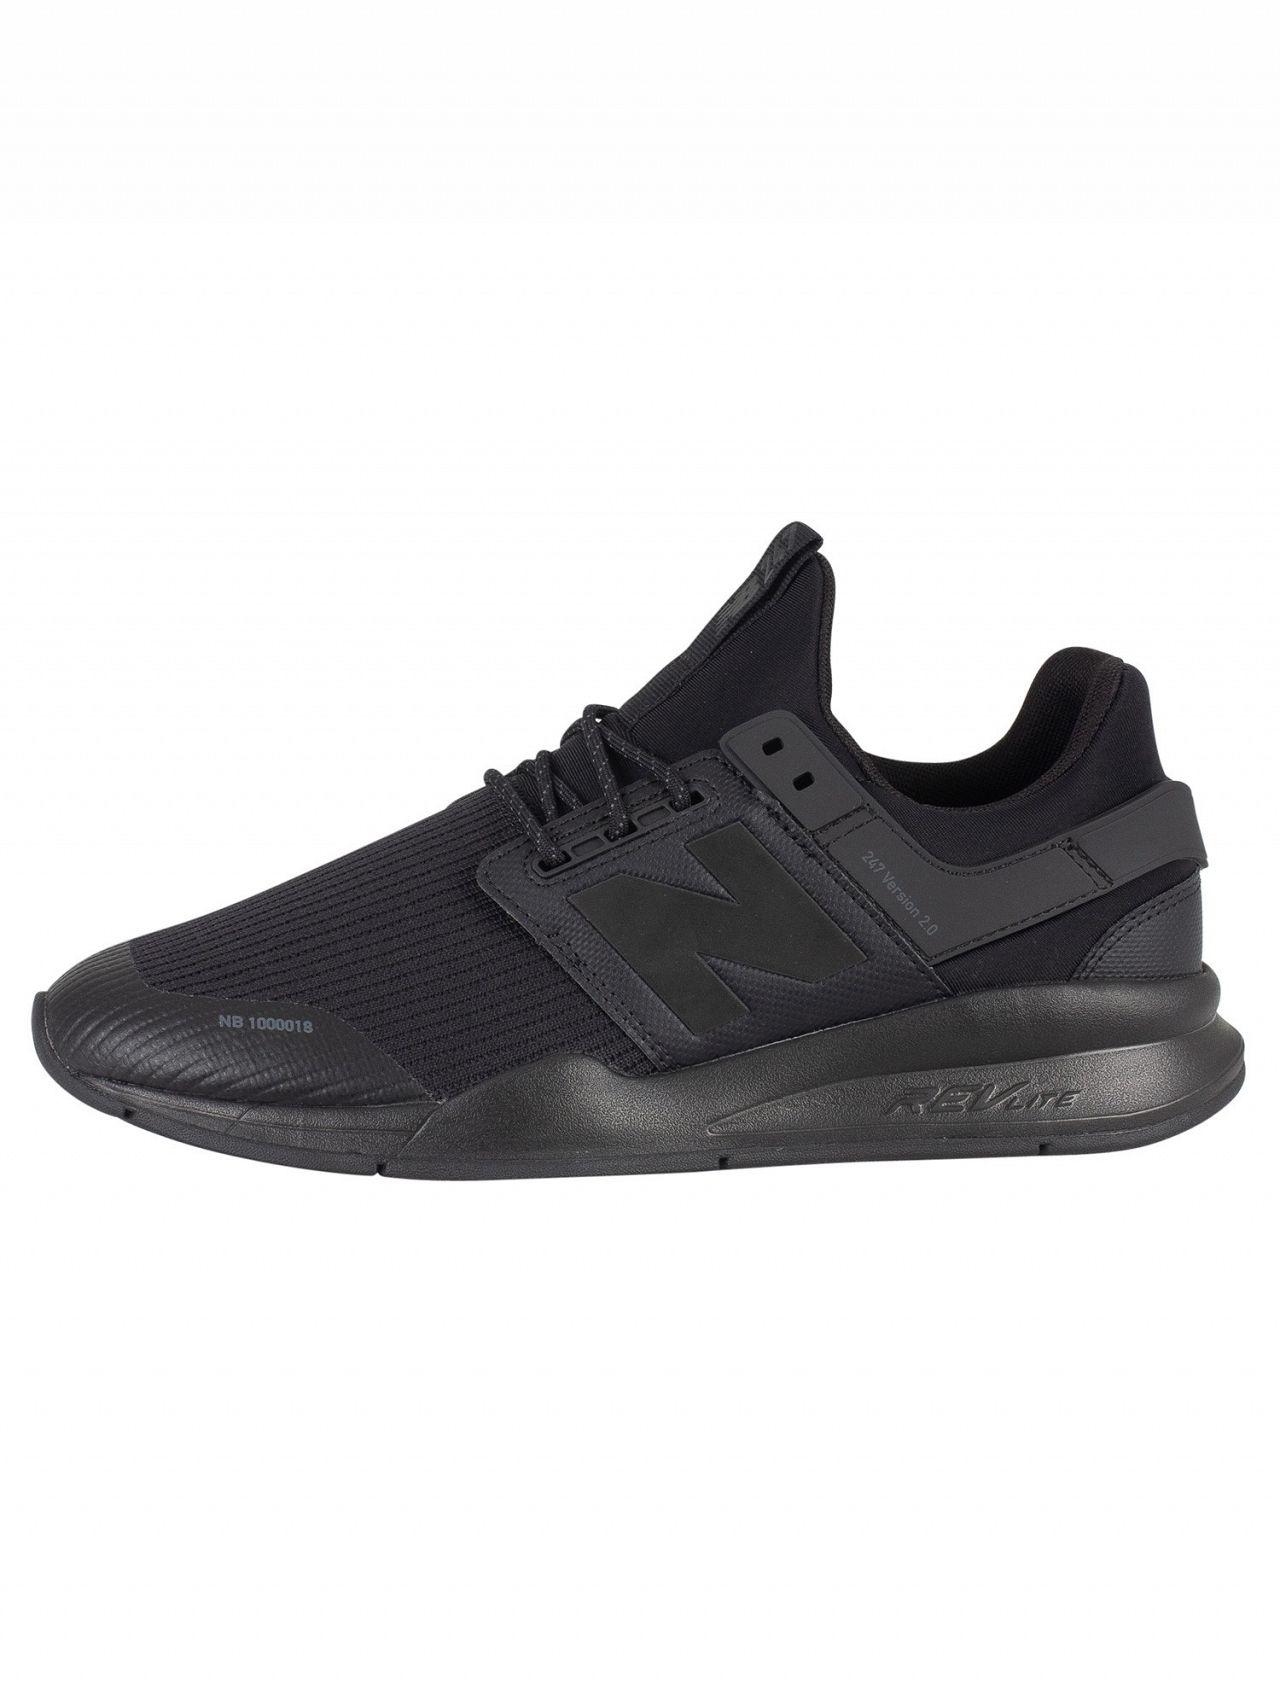 New Balance Lace Black 247 Version 2.0 Trainers for Men - Lyst